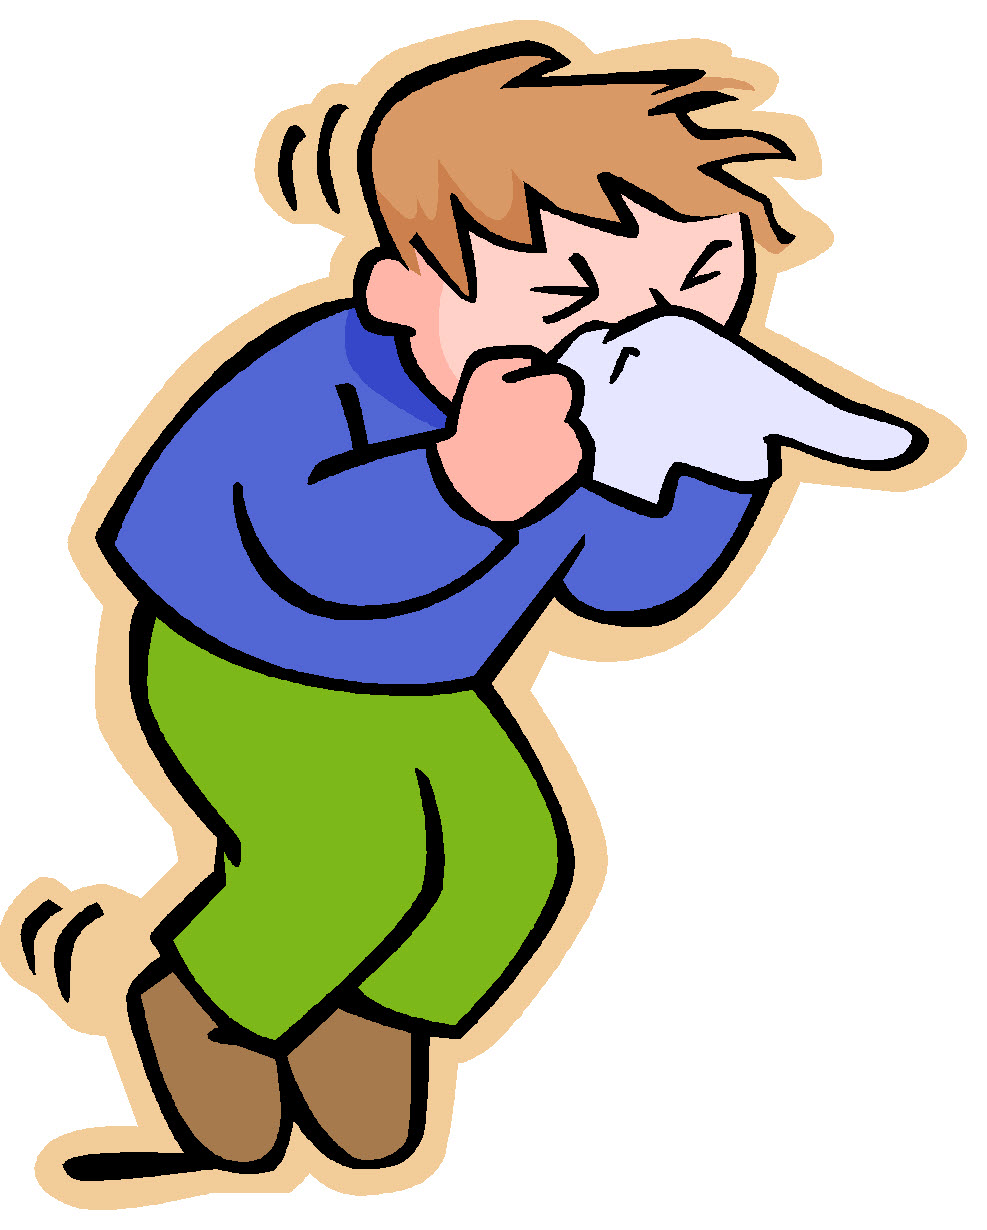 Pix For > Cold And Flu Season Clip Art